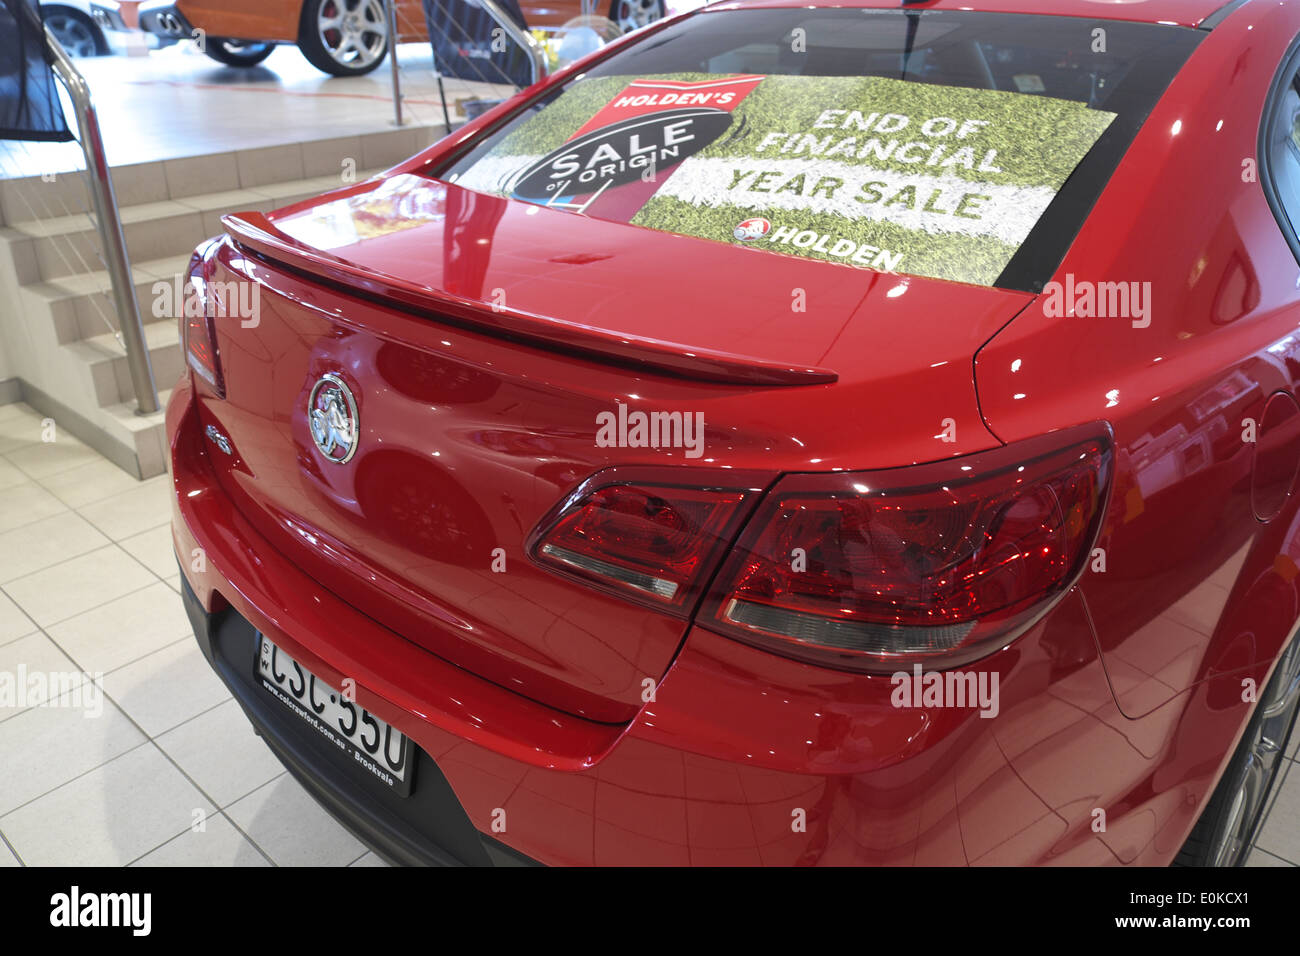 2014 holden vf commodore, sv6, for sale on a holden dealership in Sydney Stock Photo